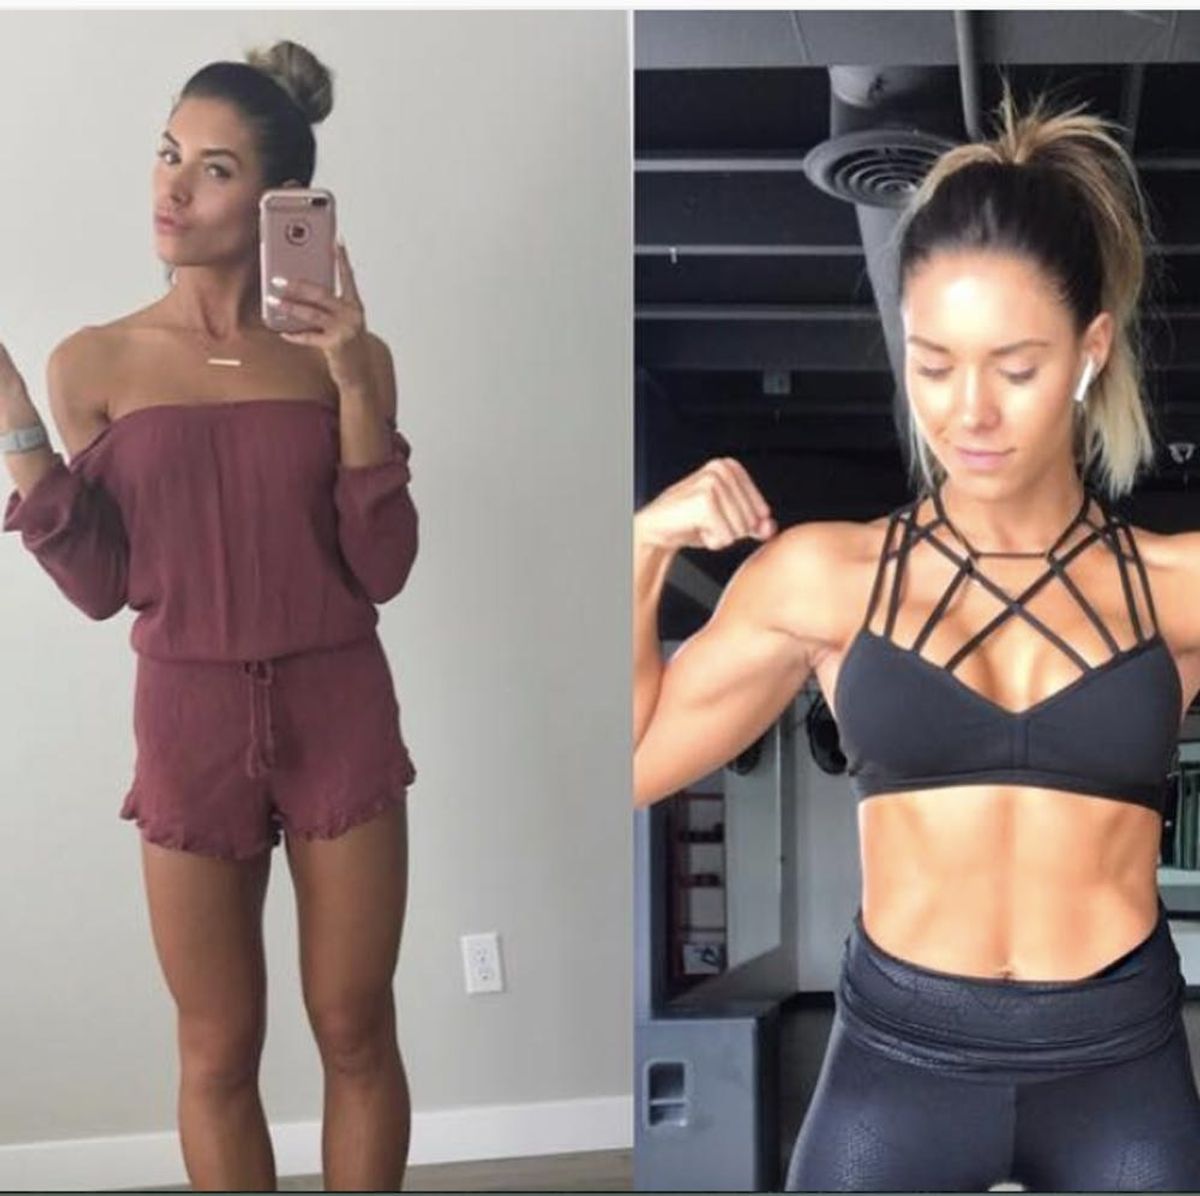 This Instagram Fitness Star’s Eloquent Reply to Body-Shaming Trolls Is Pure Poetry